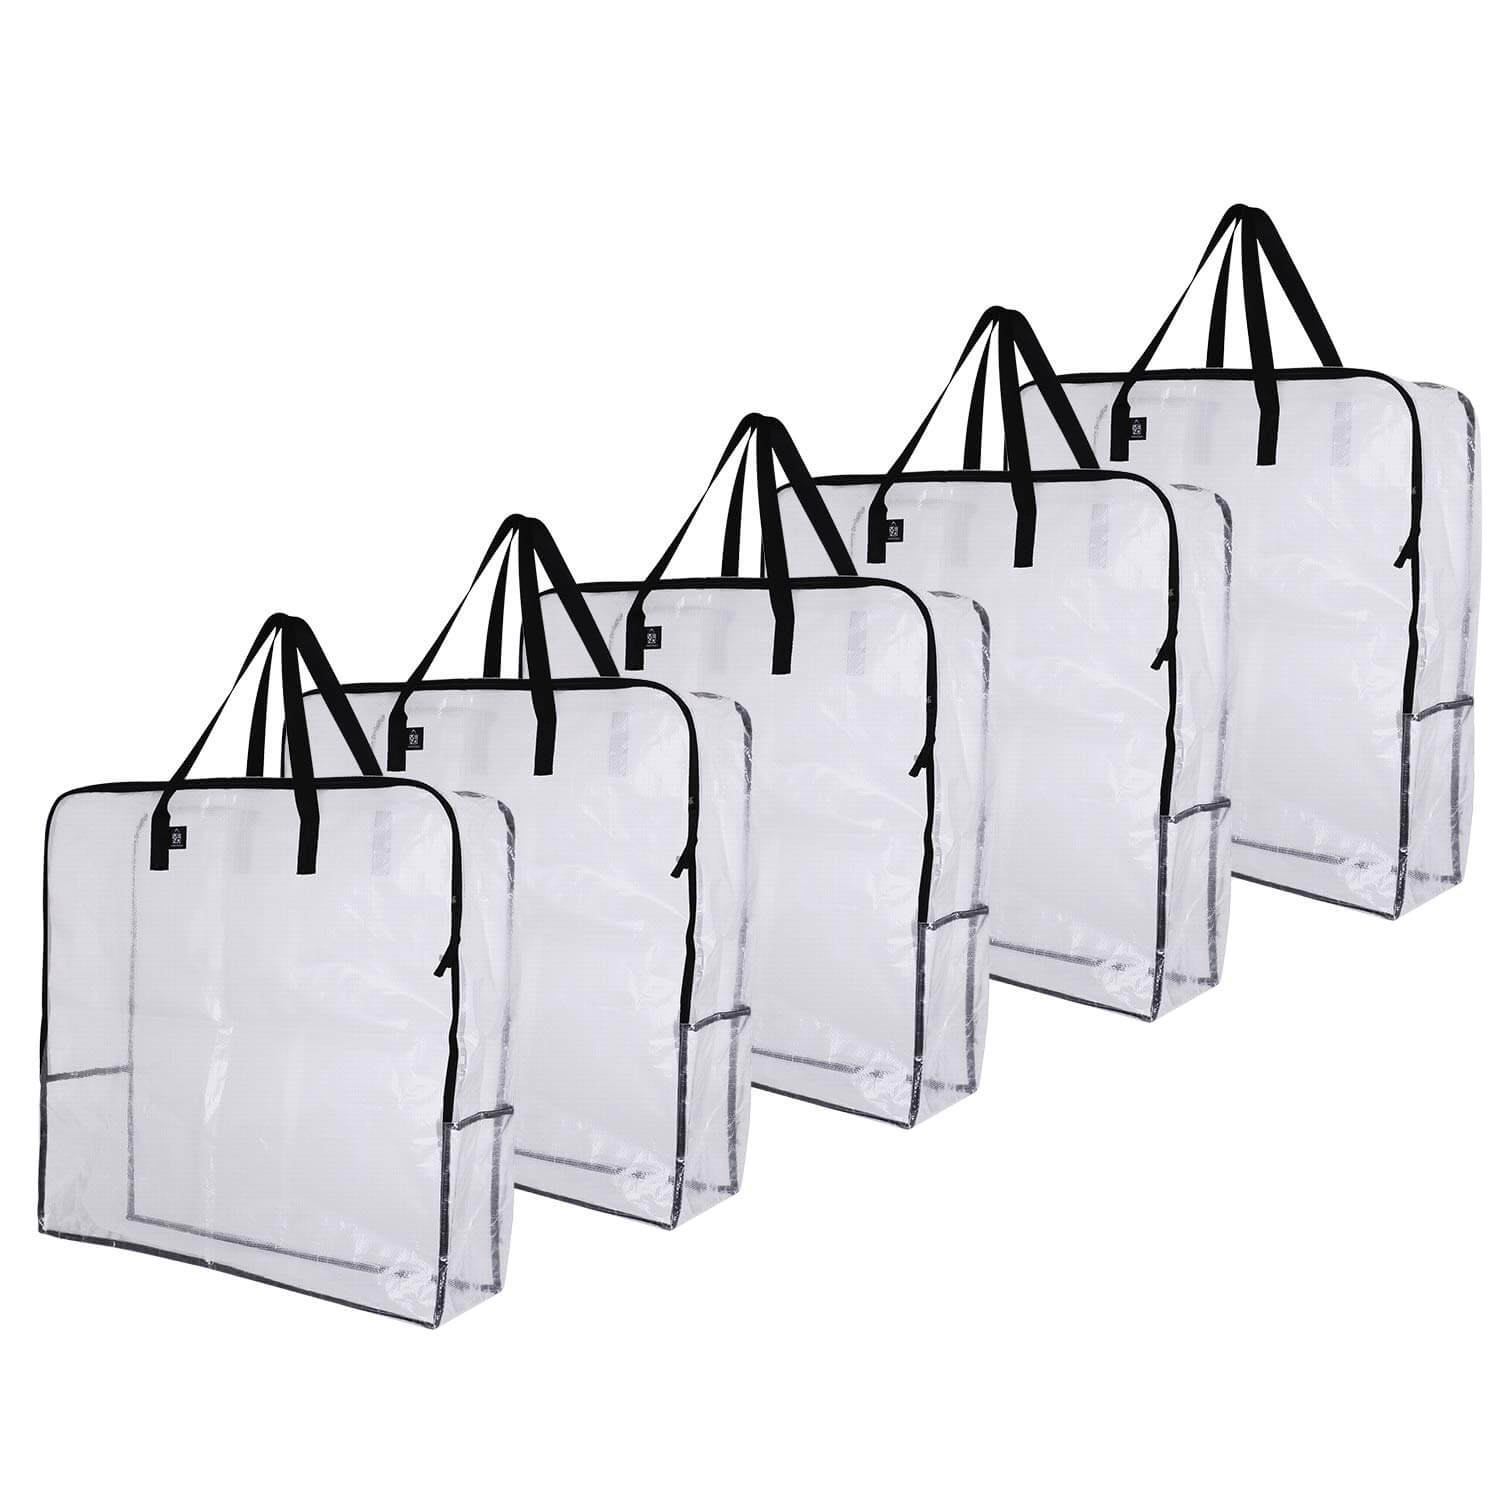 12 Pcs small gift bags with handles Practical Clear PVC Bags Gift Wrapping  Bags | eBay